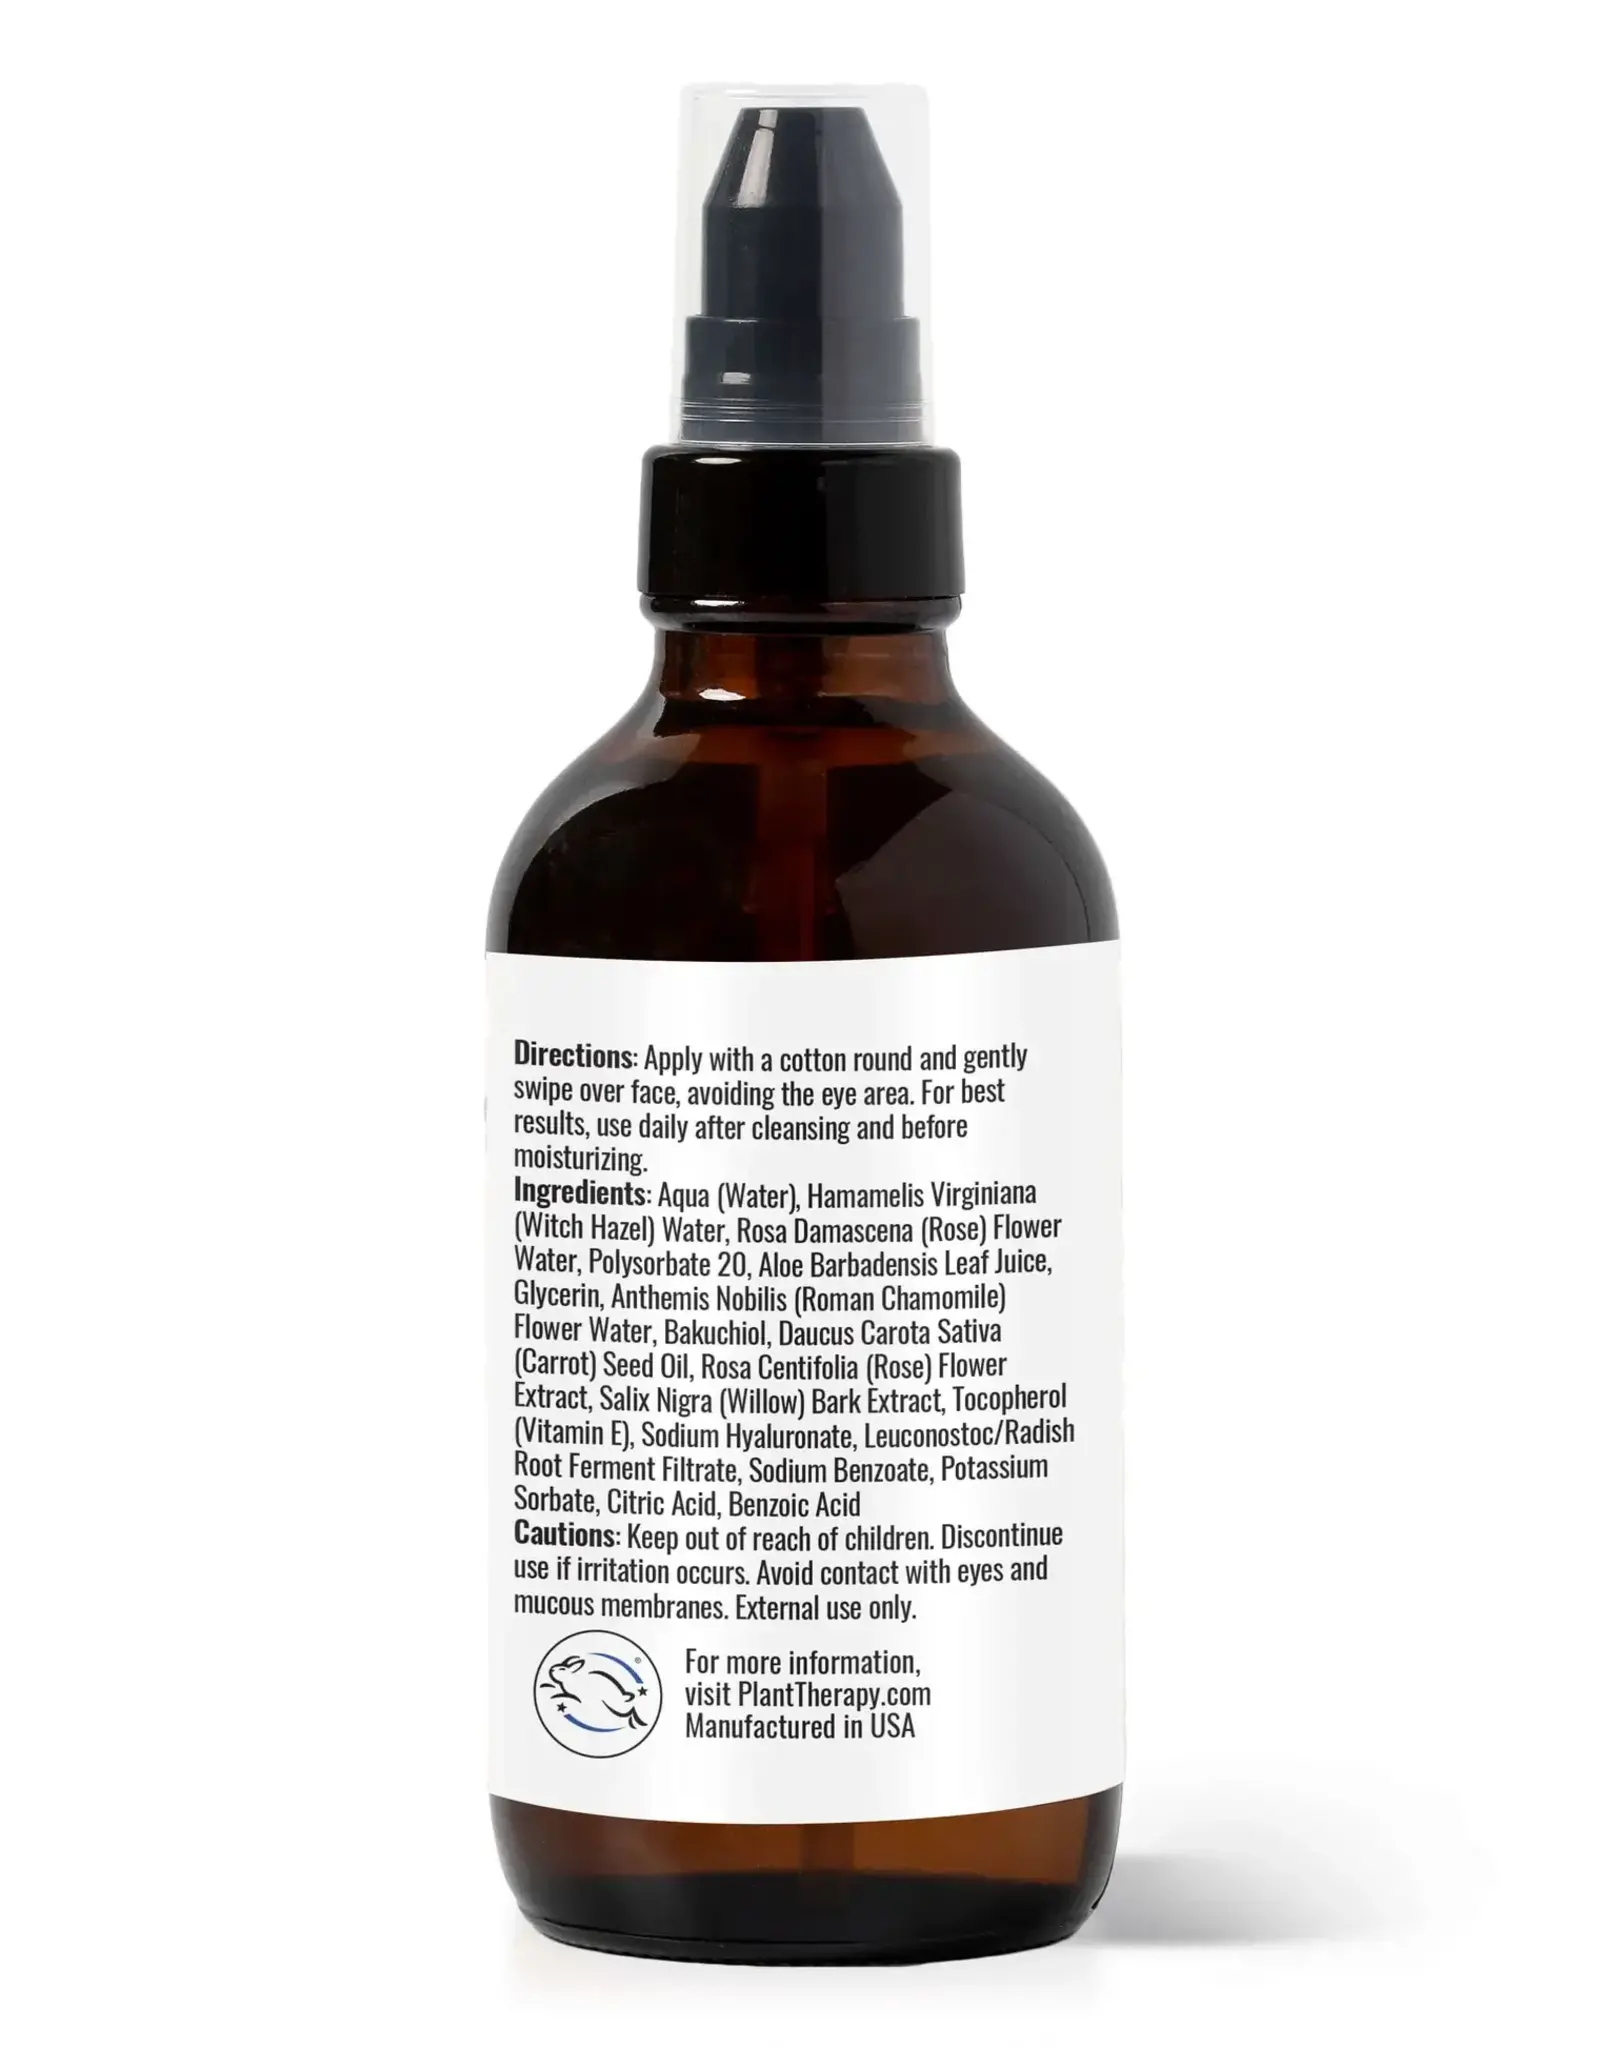 Plant Therapy Rose & Witch Hazel Facial Toner